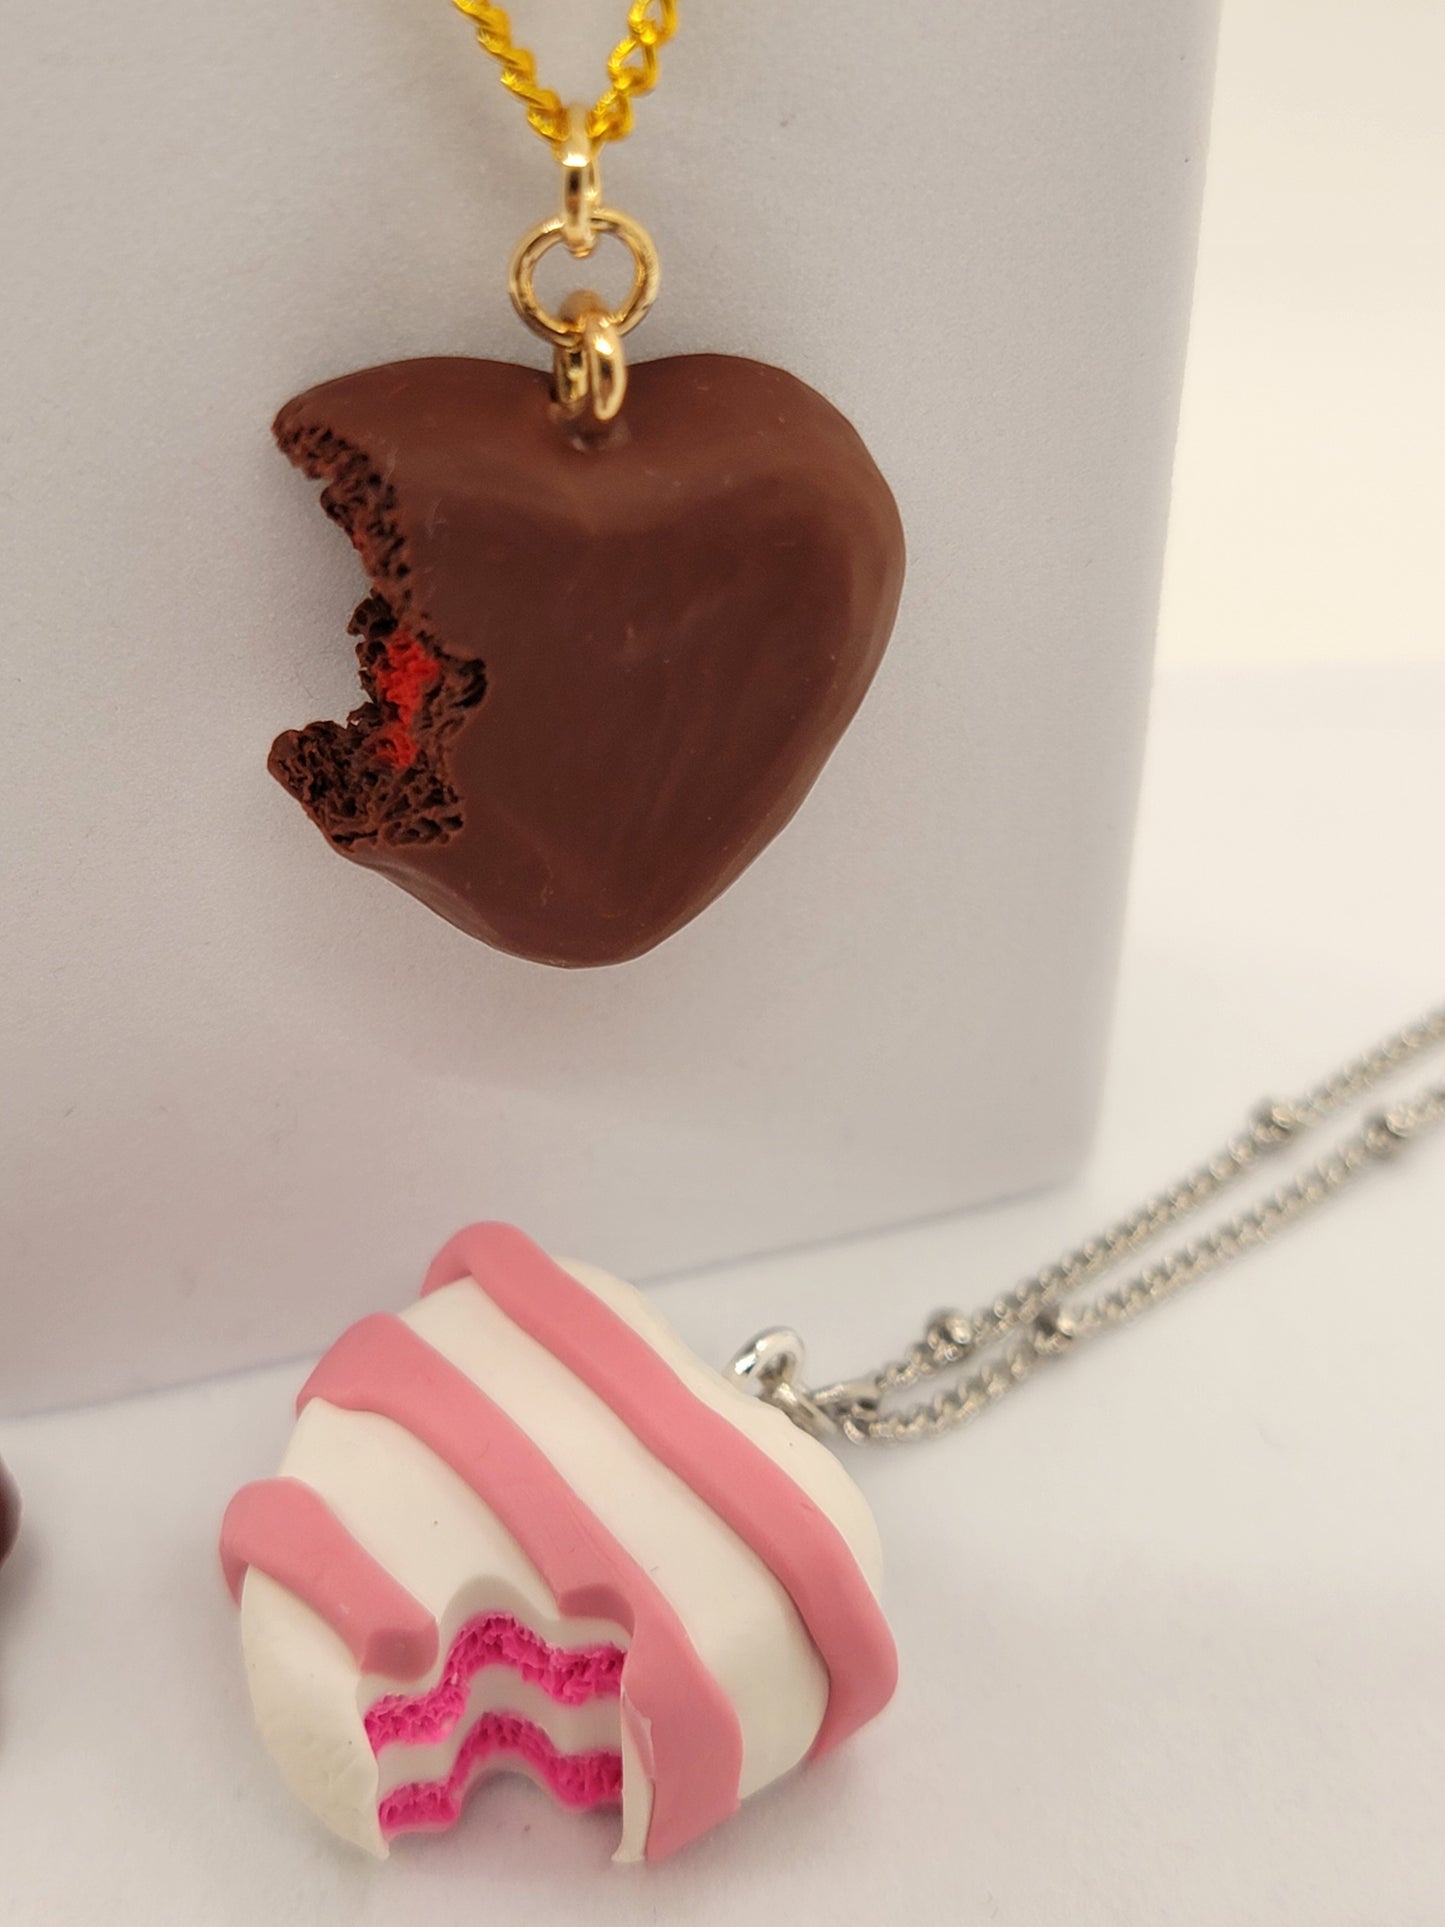 Chocolate heart bite necklace